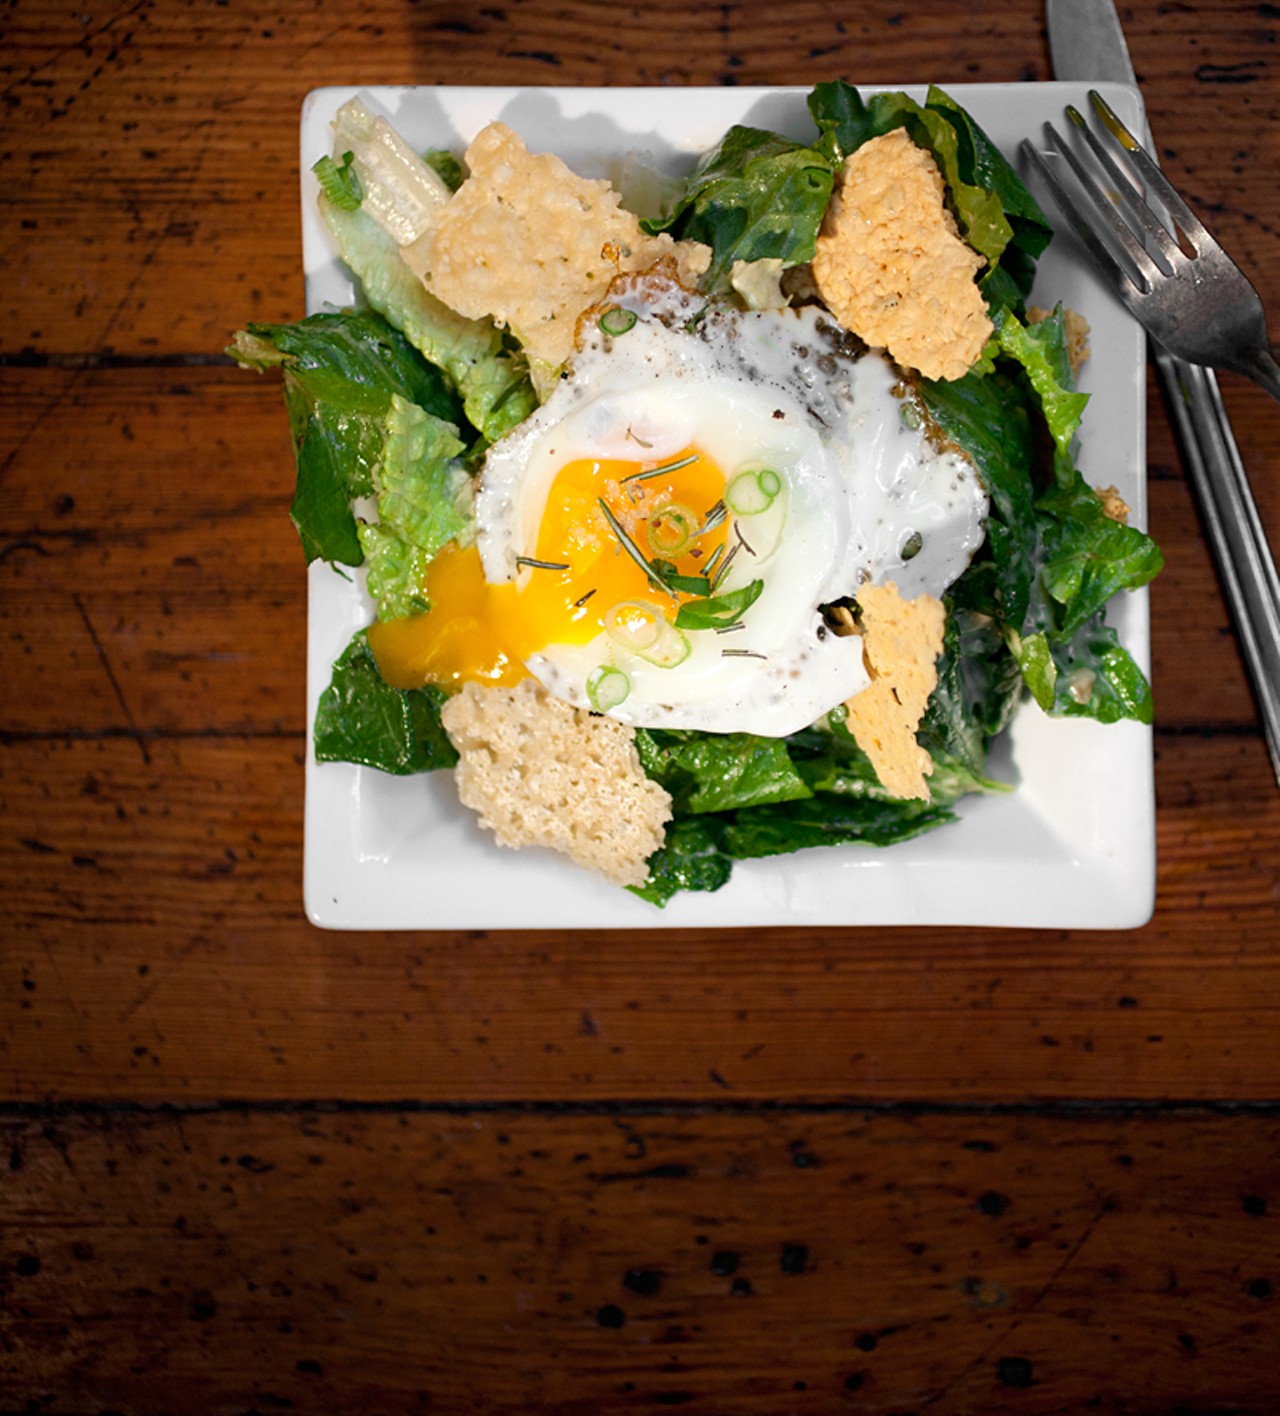 Caesar Salad is prepared with romaine, roasted parmesan, rosemary, farm egg and house dressing.